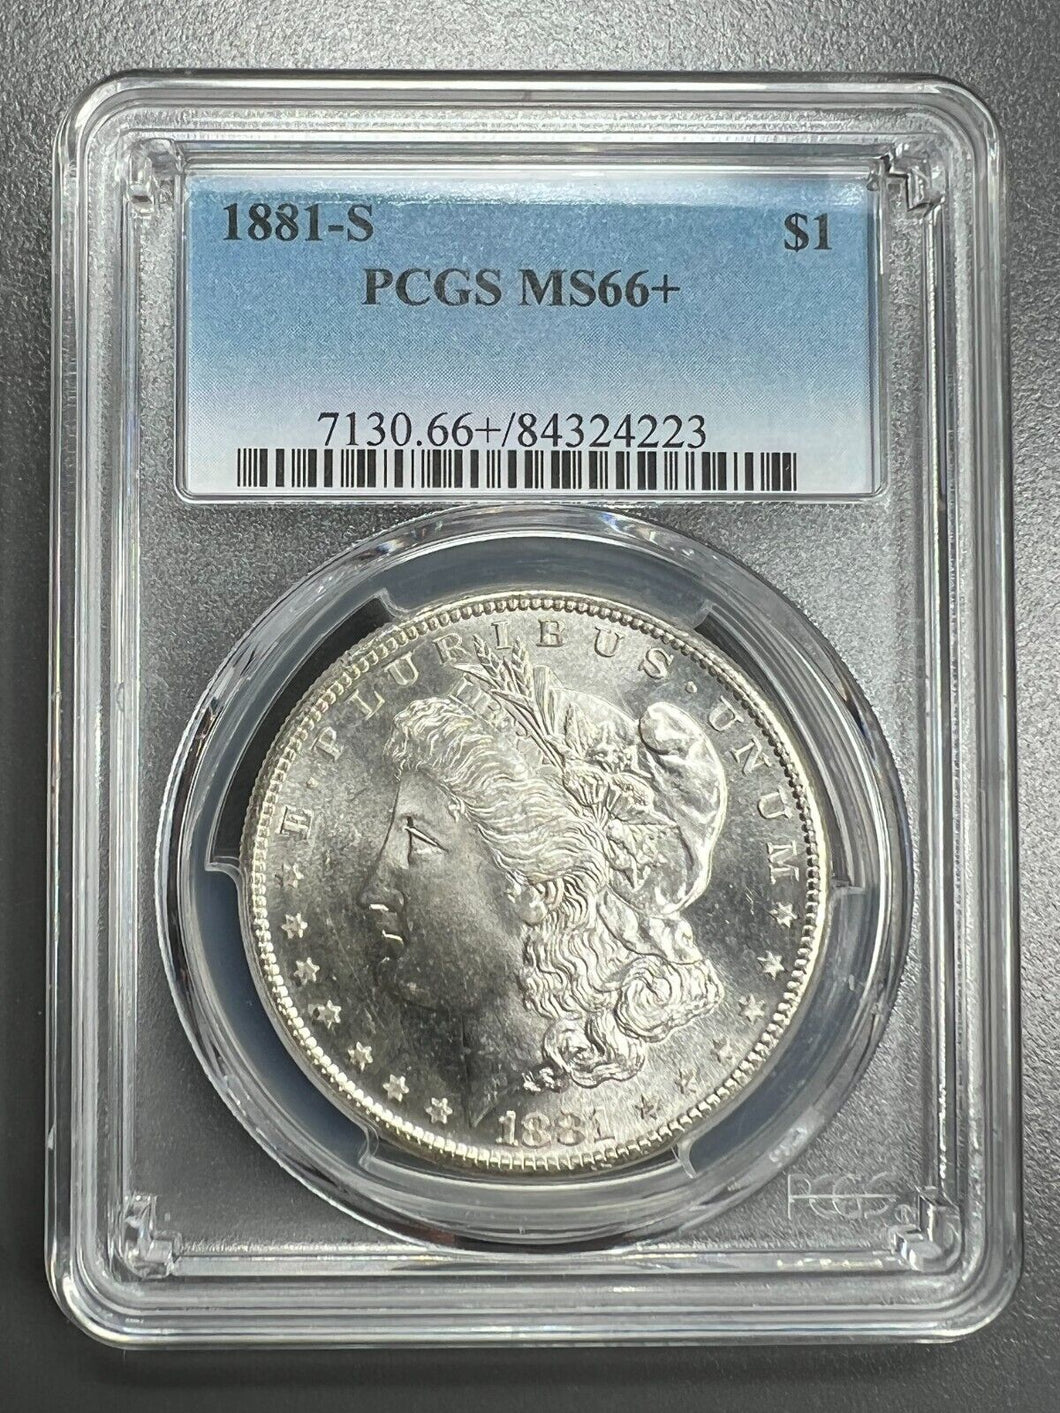 1881-S Morgan Silver Dollar PCGS MS66+ Fabulous Coin, Blast White and Frosty